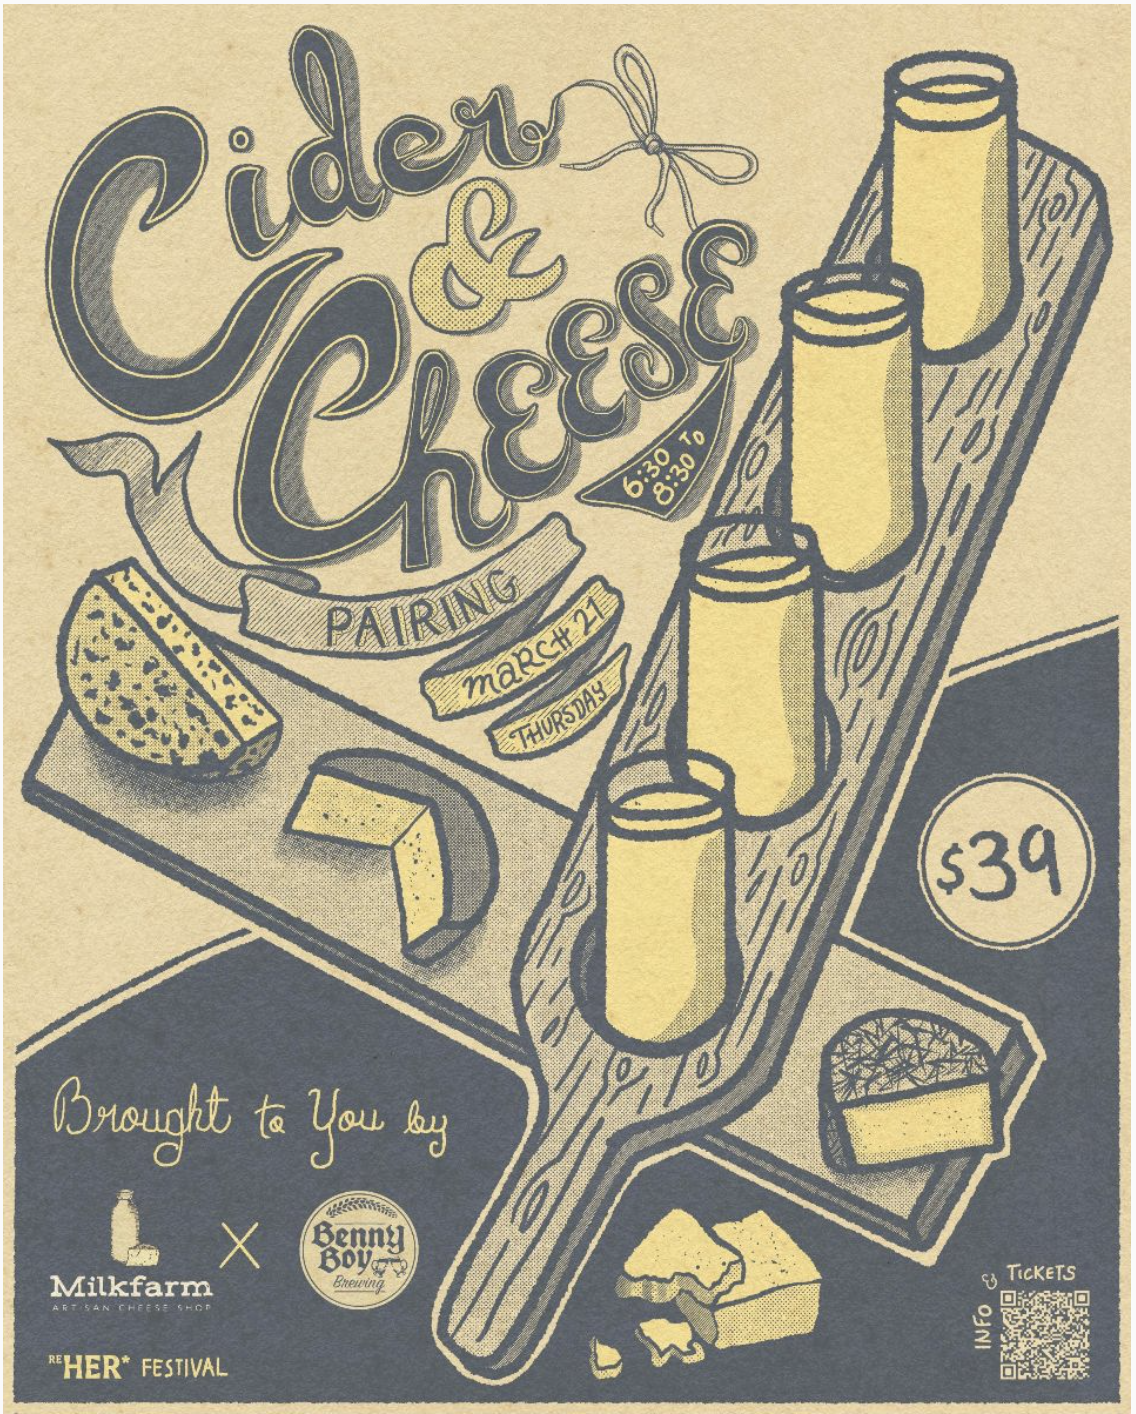 Poster of Cider and Cheese Class. The image is of a cheese plate, crossed with a beer paddle board holding 4 glasses of beer.